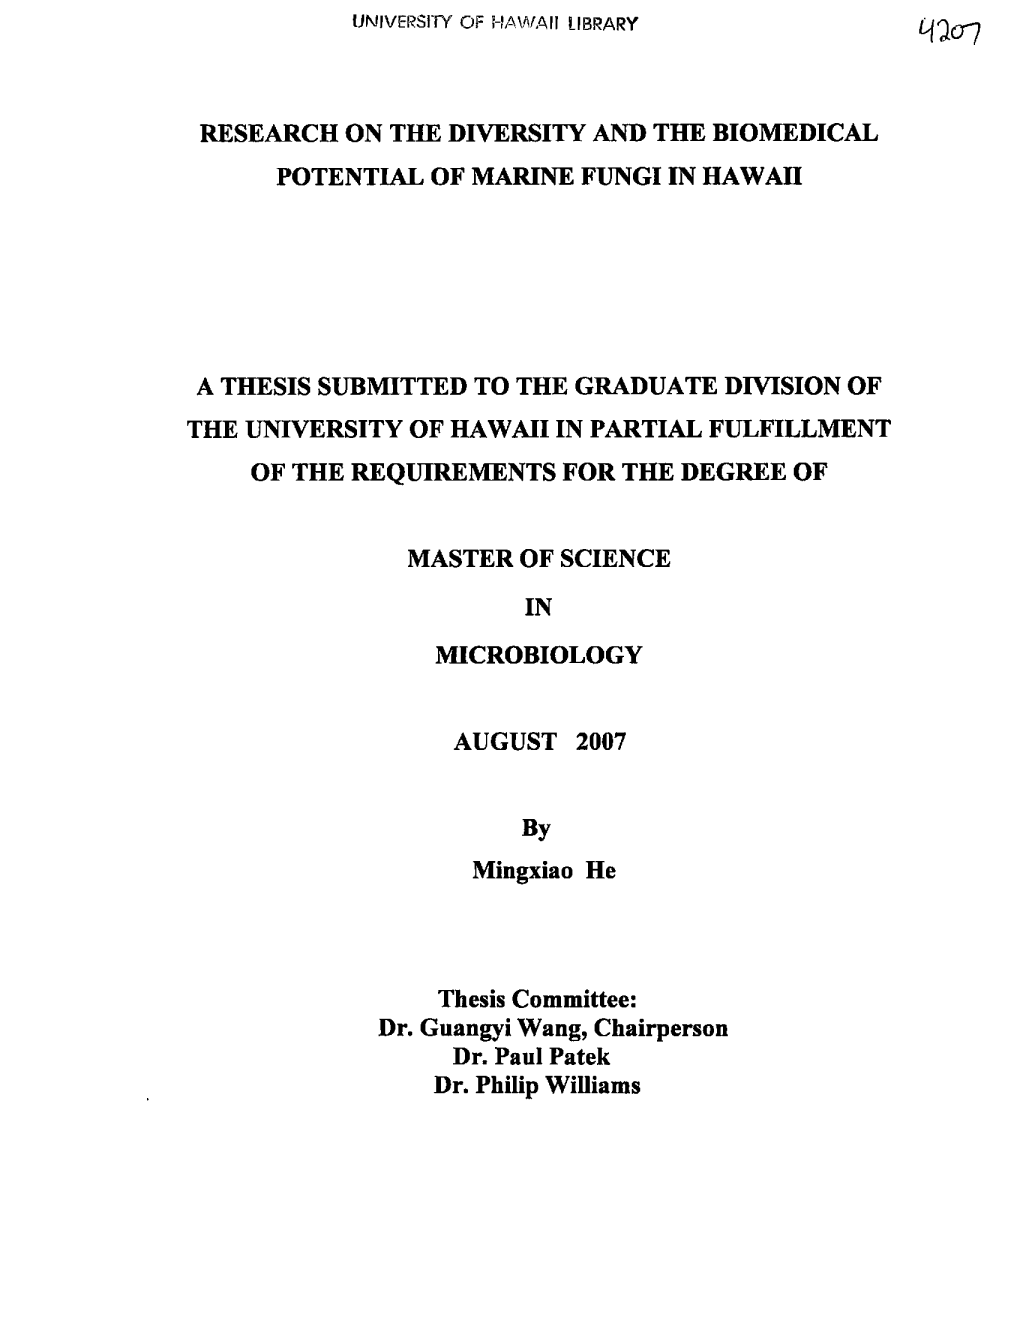 Research on the Diversity and the Biomedical Potential of Marine Fungi in Hawaii a Thesis Submitted to the Graduate Division Of